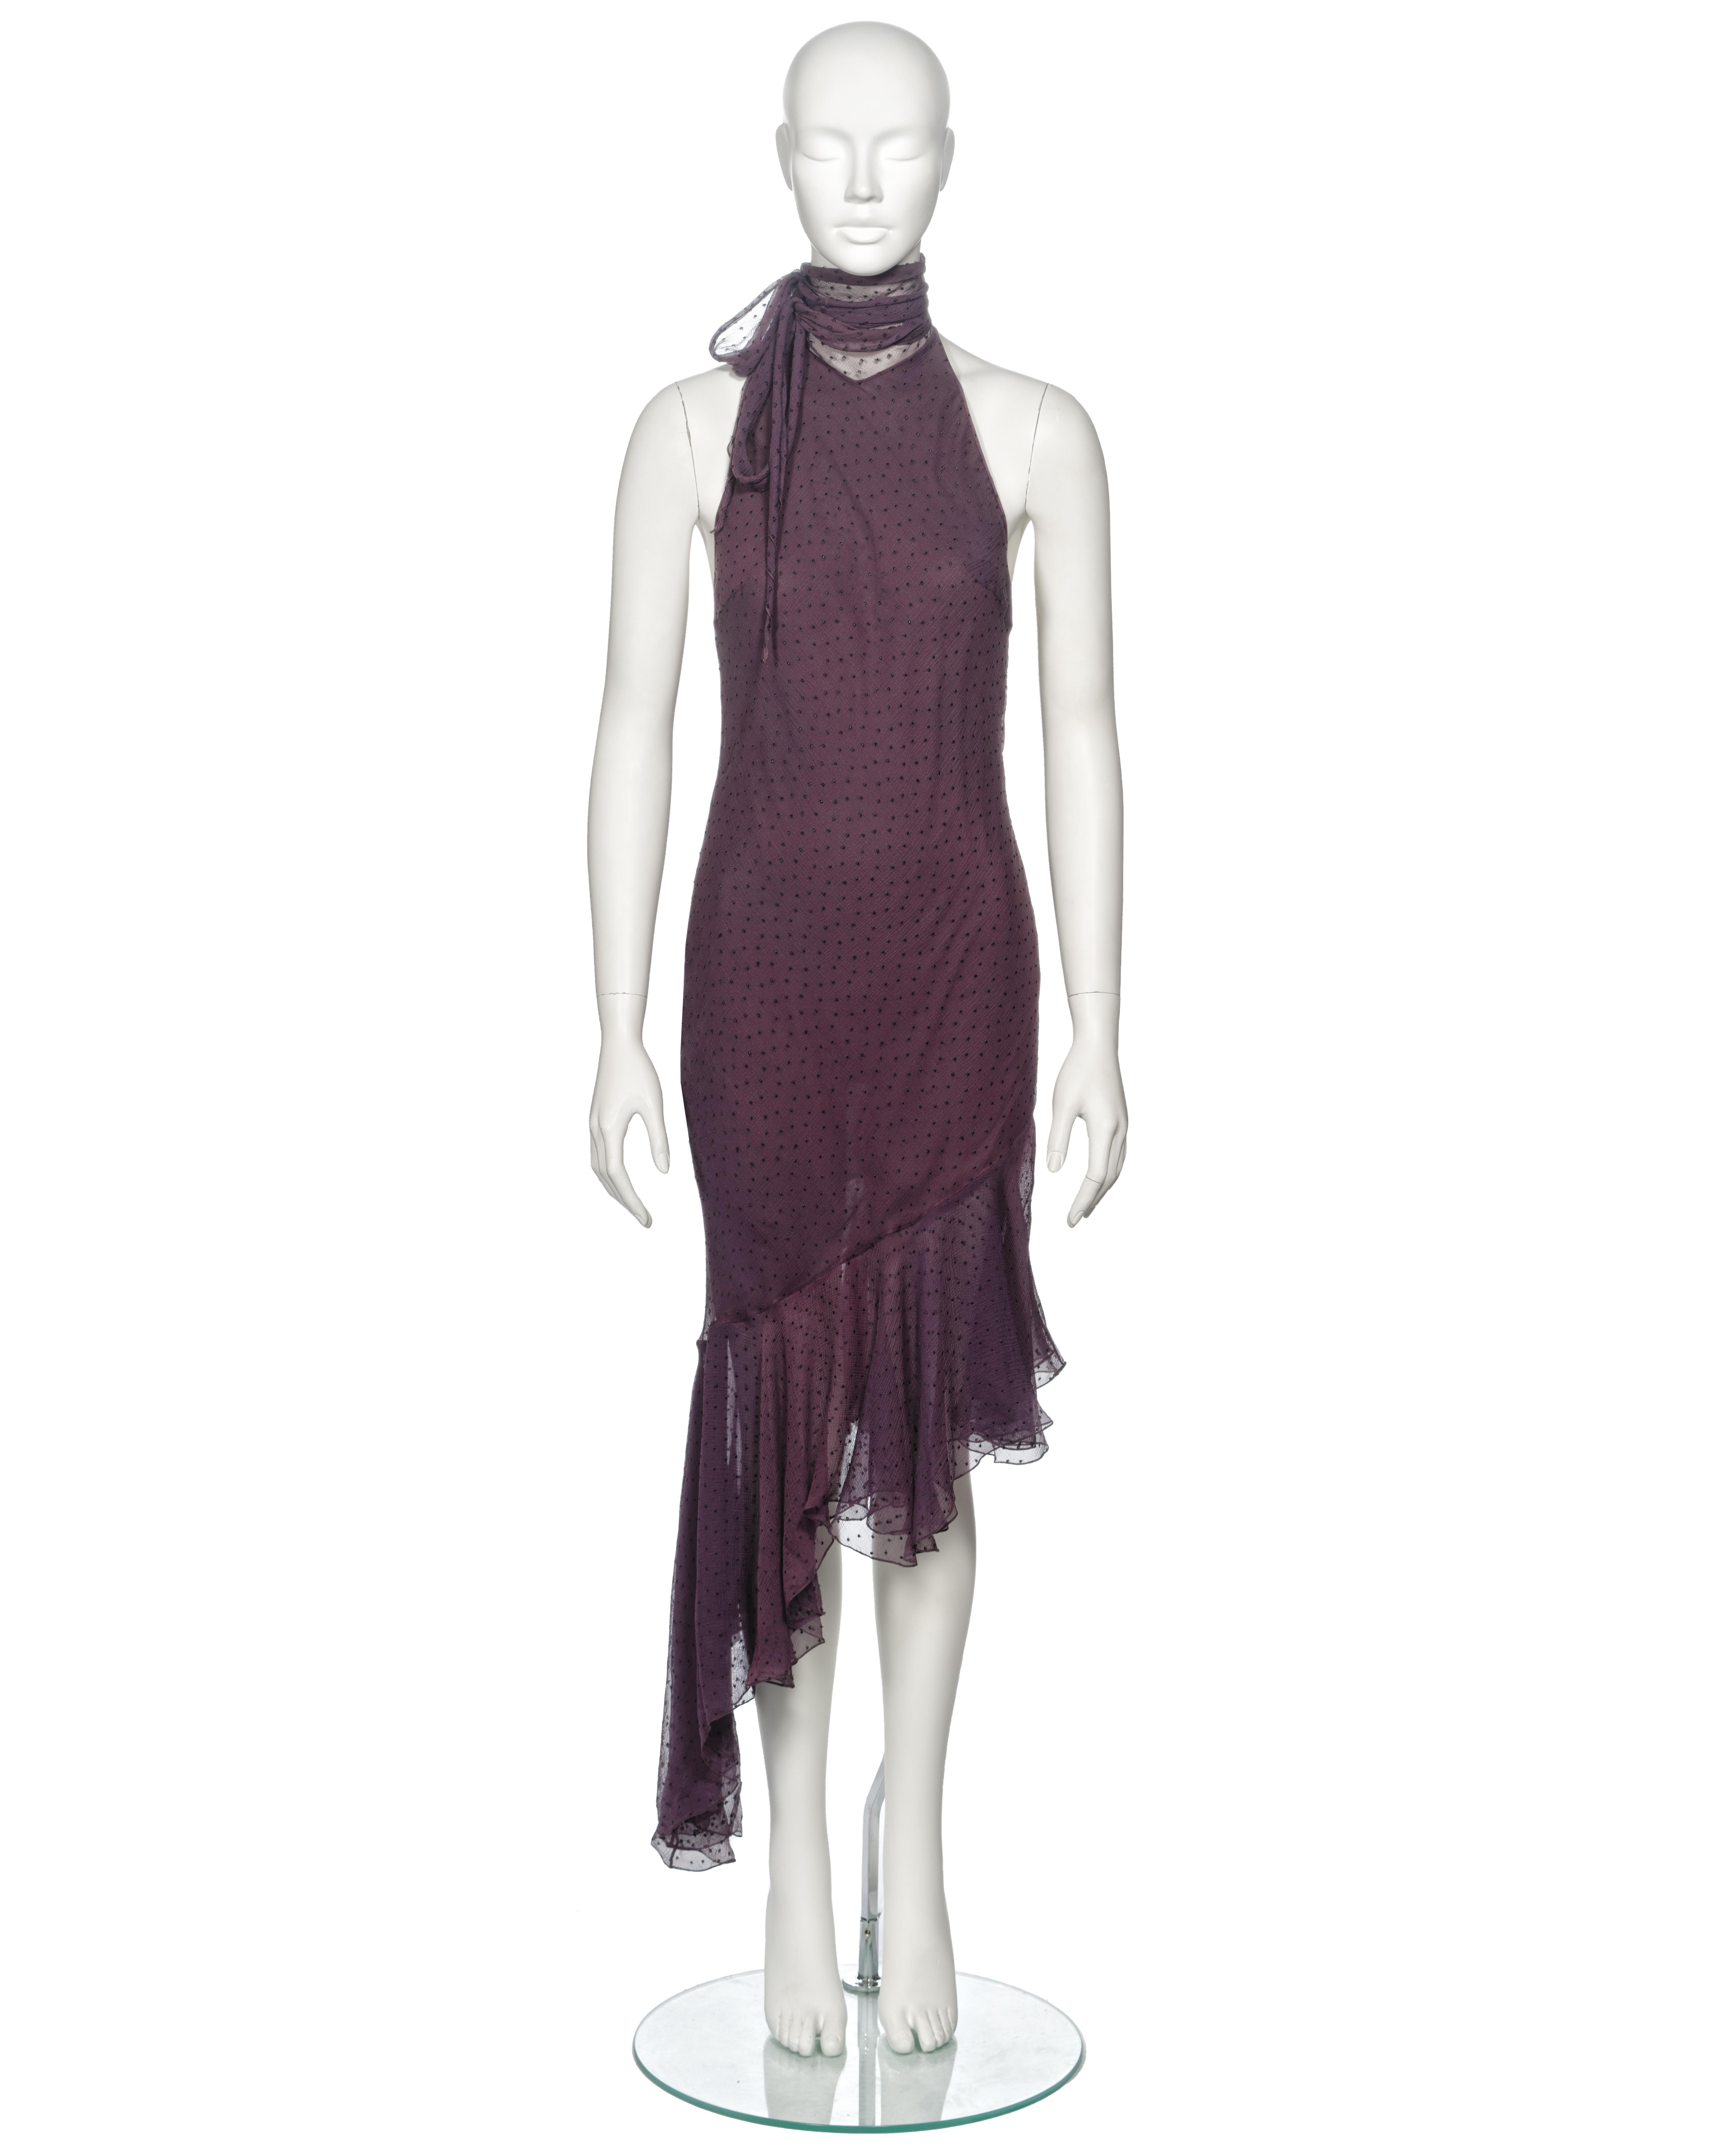 ▪ Archival Christian Dior Cocktail Dress
▪ Creative Director: John Galliano
▪ Fall-Winter 2000
▪ Sold by One of a Kind Archive
▪ Purple silk chiffon with a jacquard polkadot pattern in viscose yarn 
▪ Halter neck with scarf ties
▪ Asymmetric